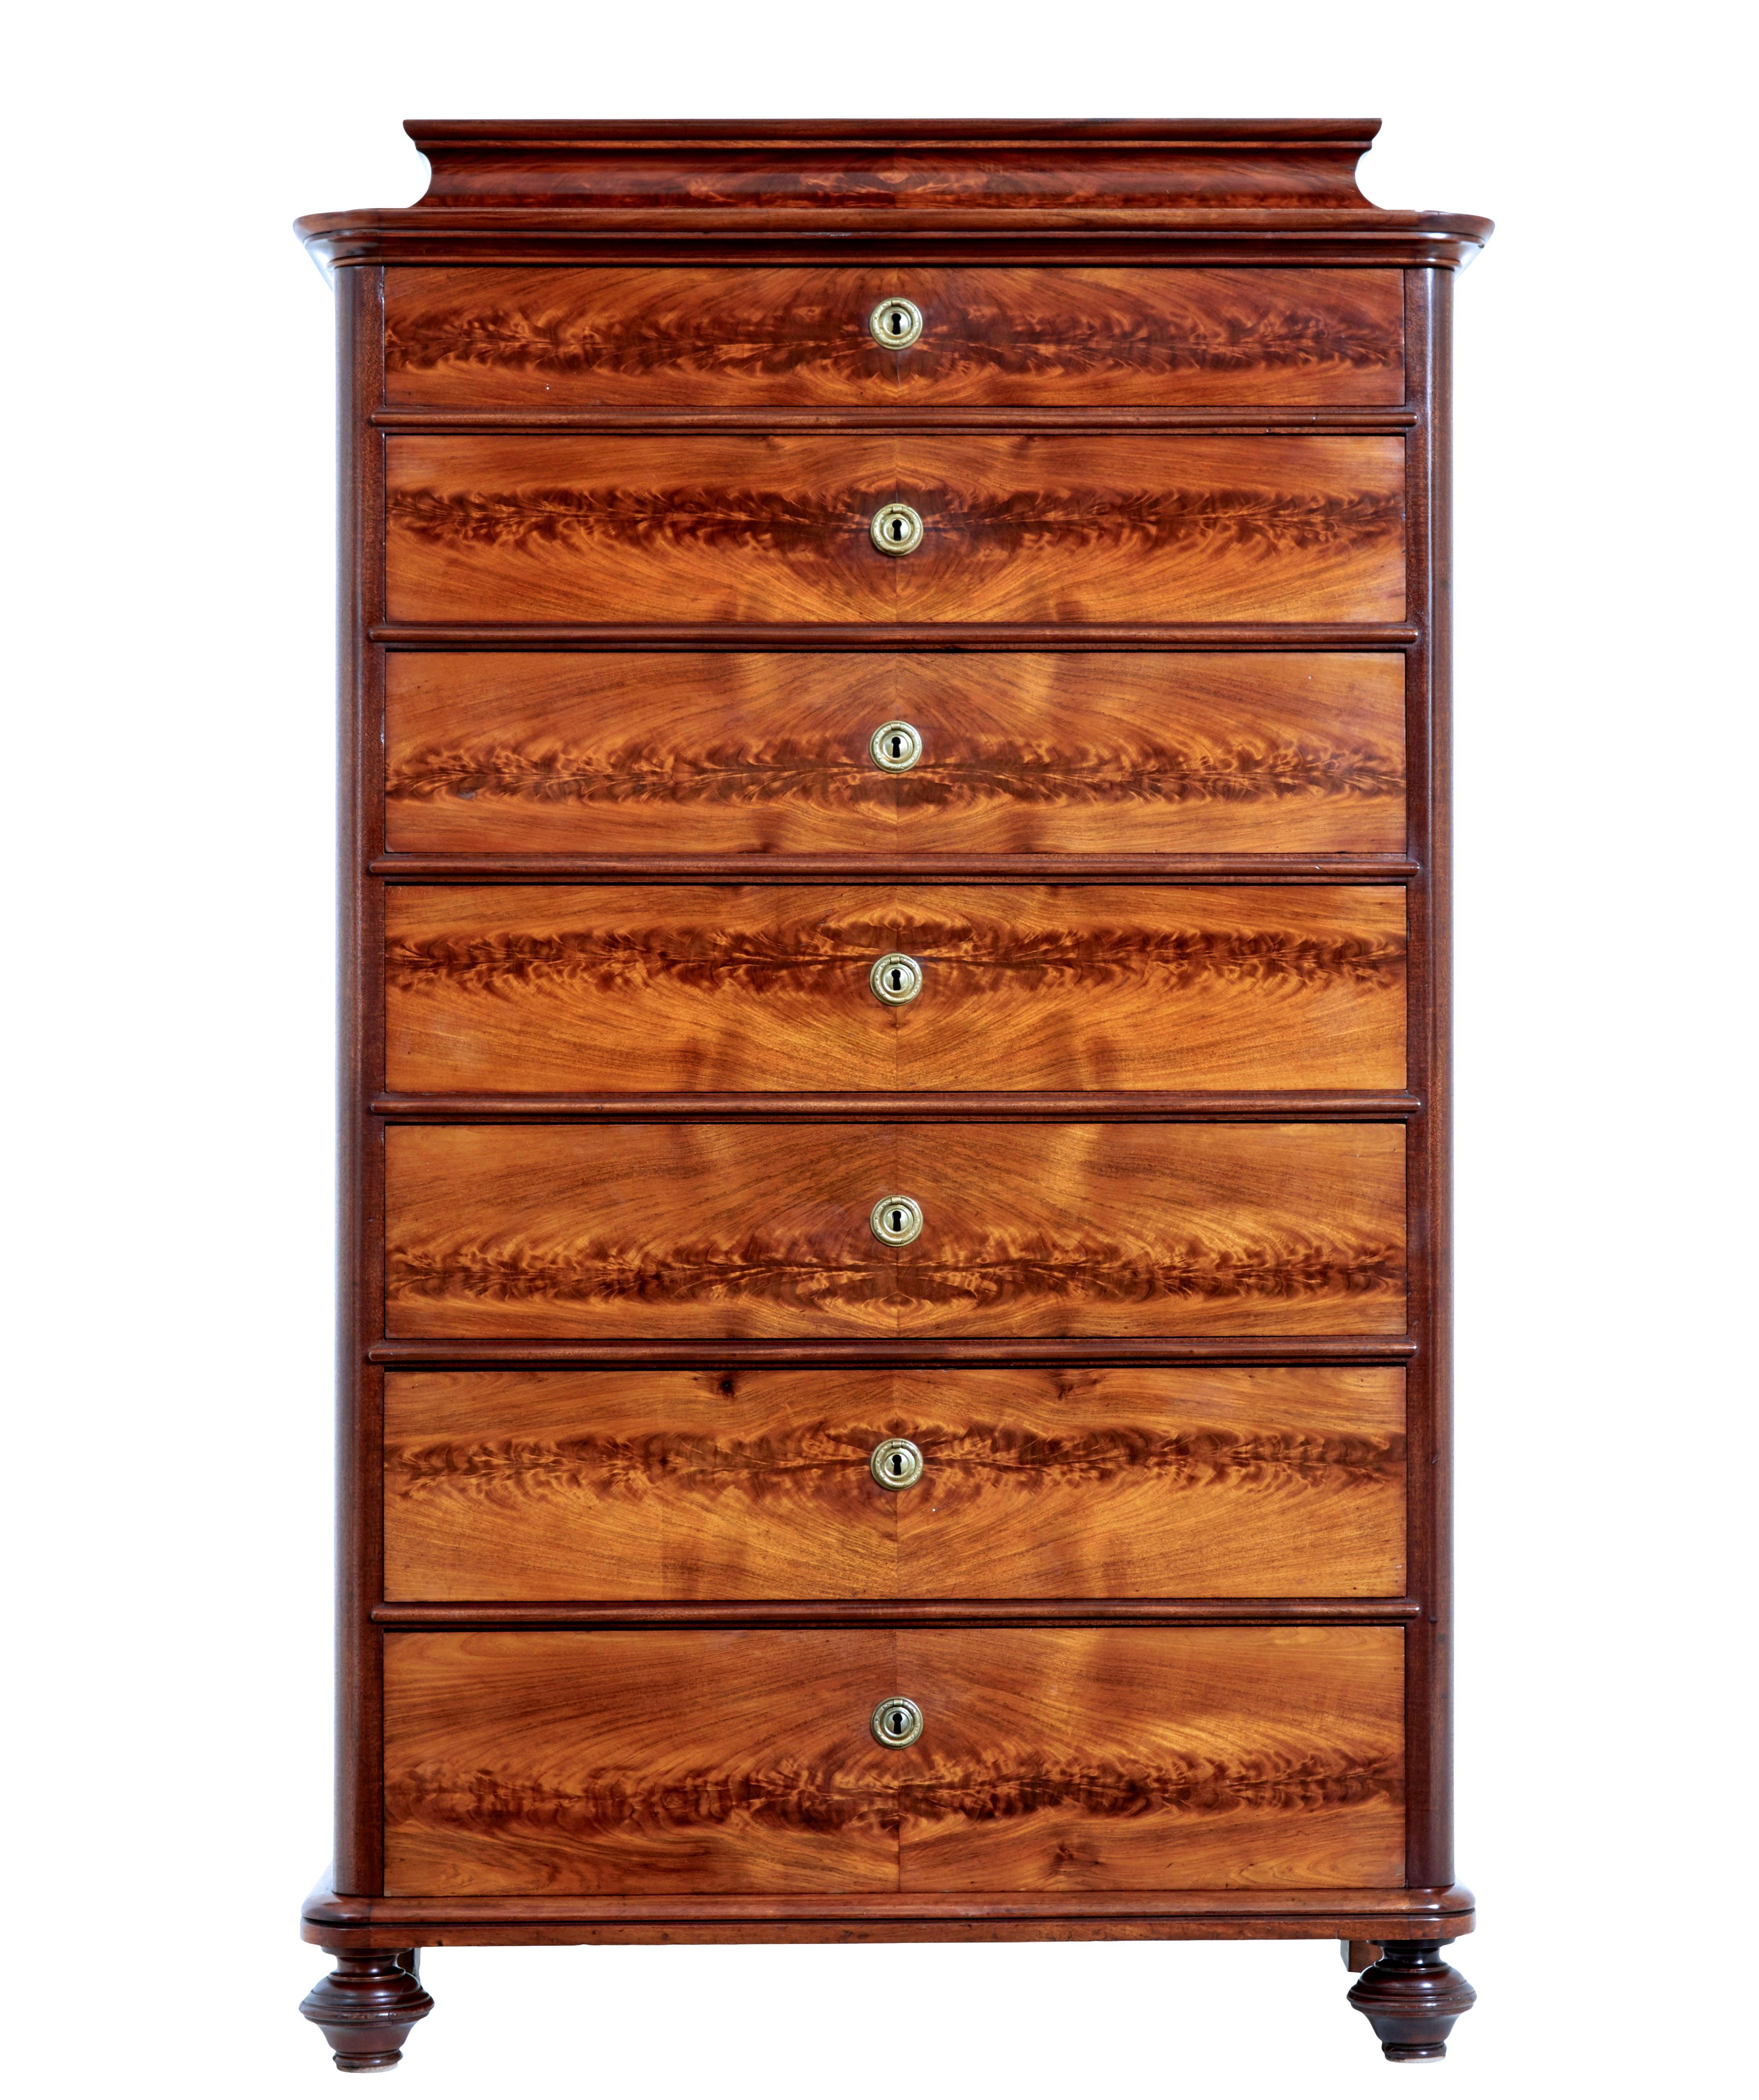 19th century flame mahogany tall chest of drawers circa 1870.

Fine quality caddy top tall chest of drawers, which is also known as a seminere chest, because of the use of 7 drawers.

Made using mahogany and flame mahogany veneers.  Caddy shaped top